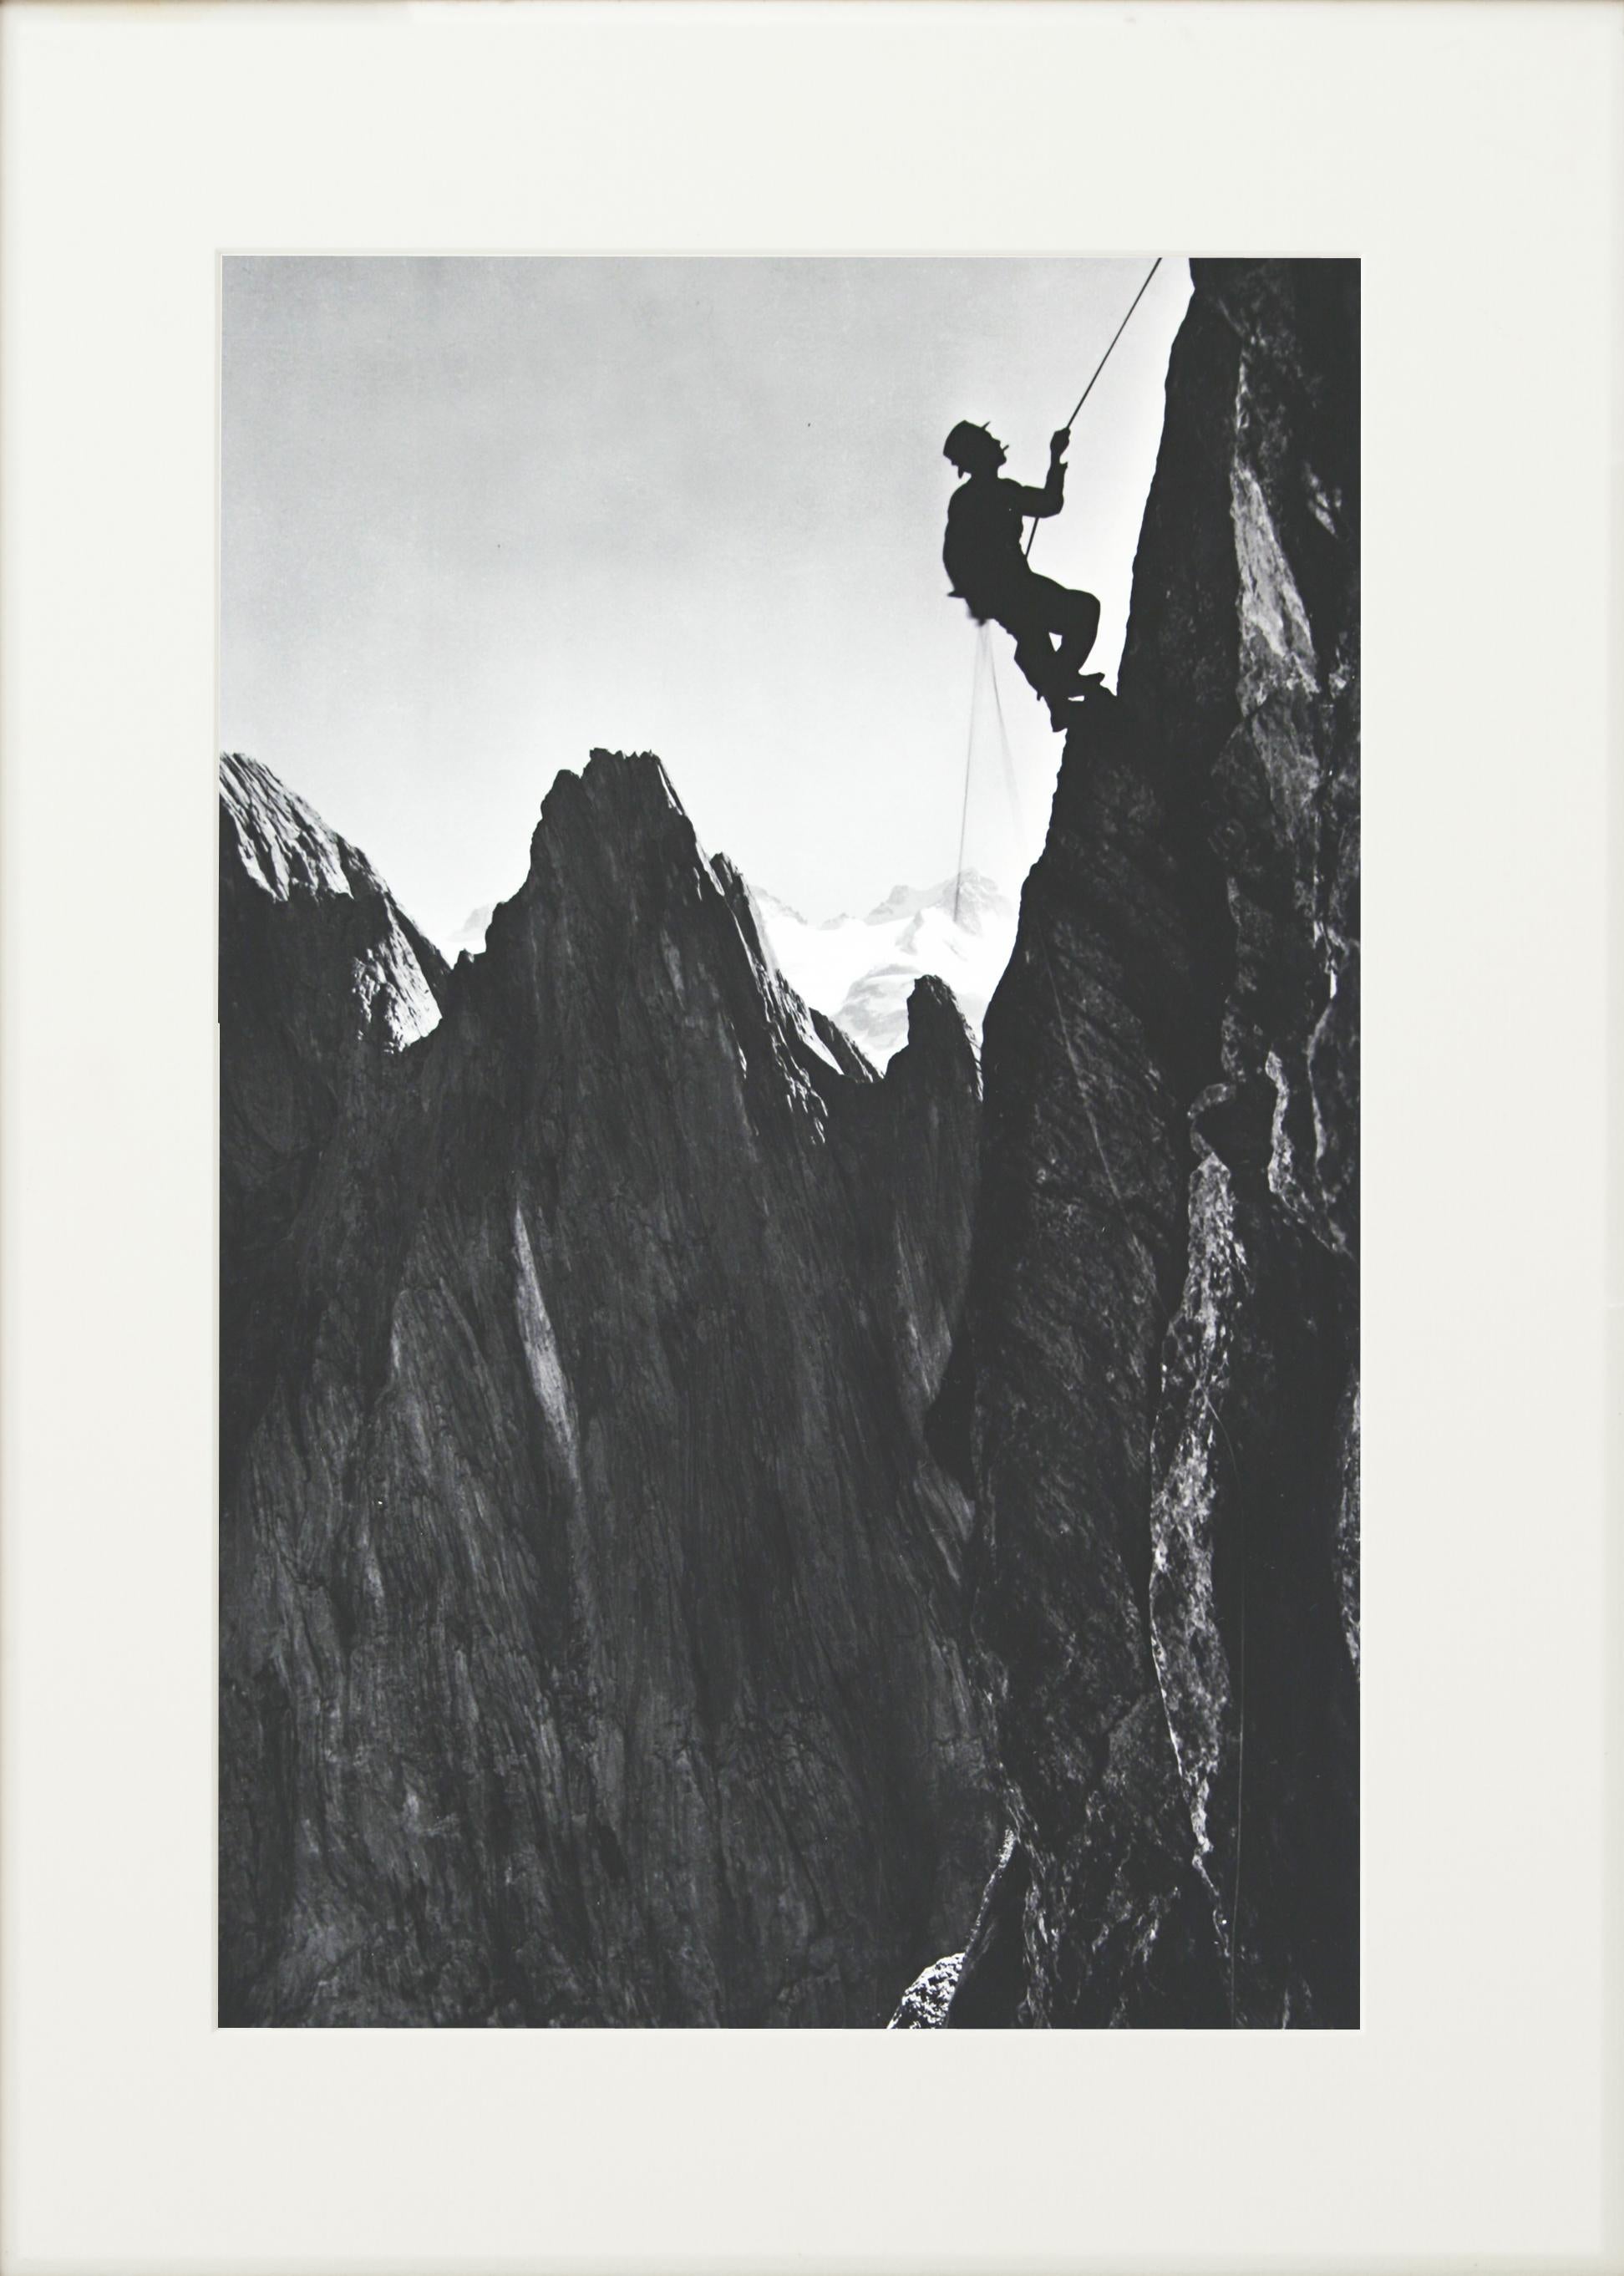 Vintage Style Photography, Framed Alpine Ski Photograph, The Climber In Good Condition For Sale In Oxfordshire, GB